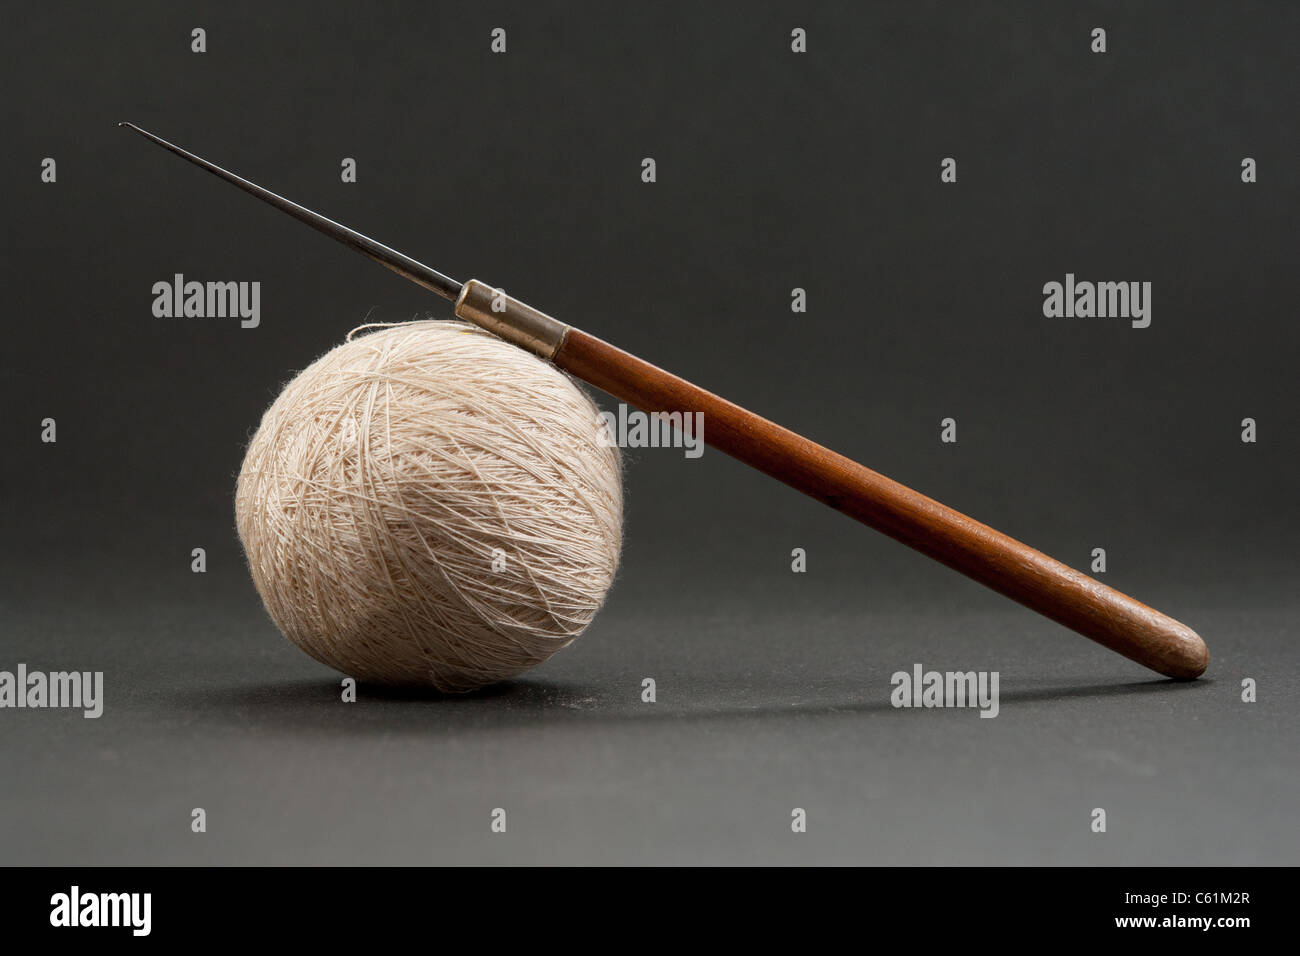 https://c8.alamy.com/comp/C61M2R/vintage-crochet-set-ultra-thin-floss-and-hook-with-wooden-handle-C61M2R.jpg